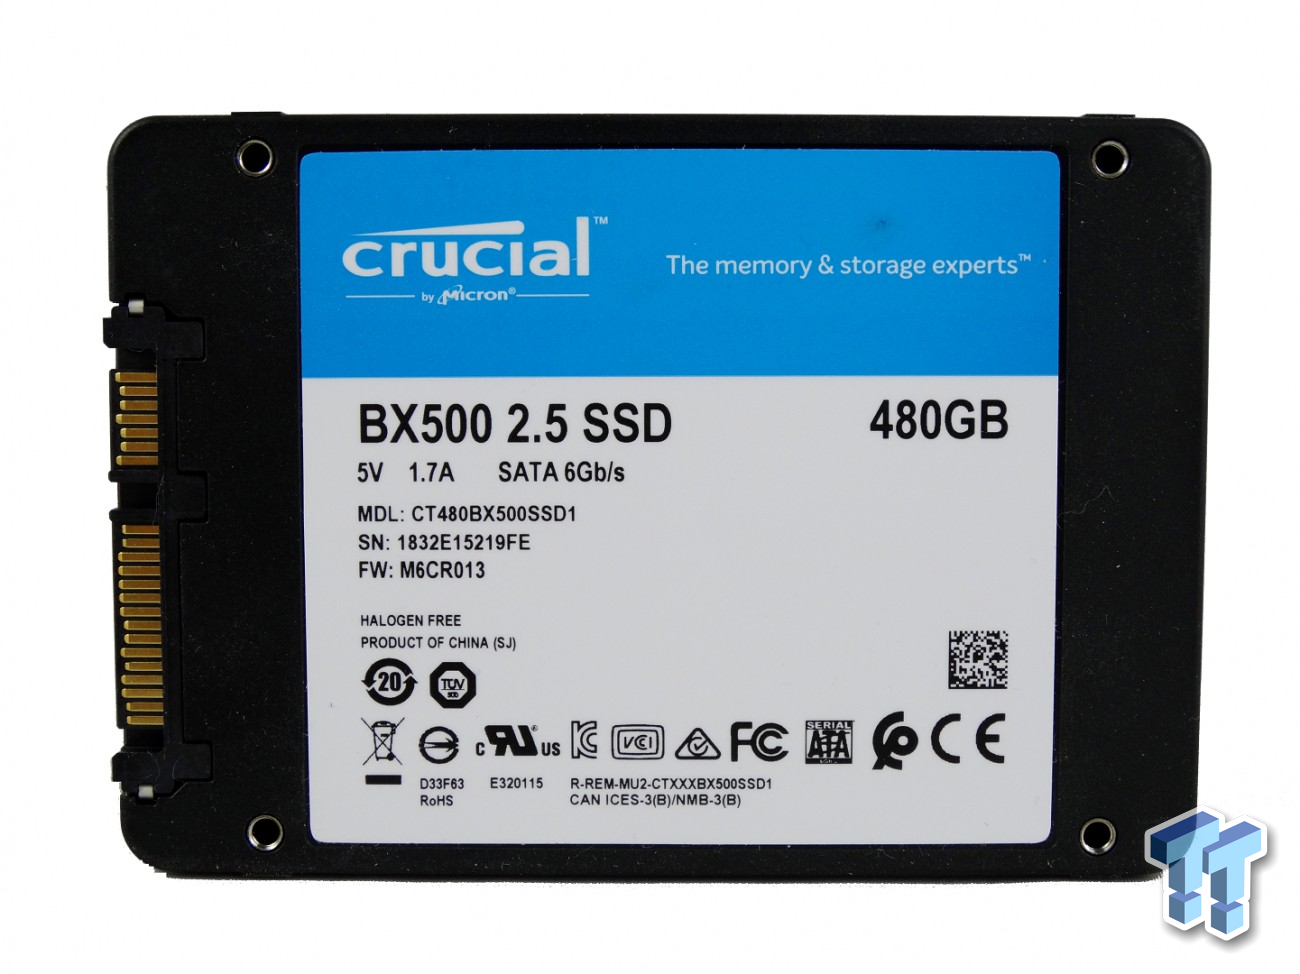 Crucial BX500 SSD Review - Fewer Components, Lower Prices